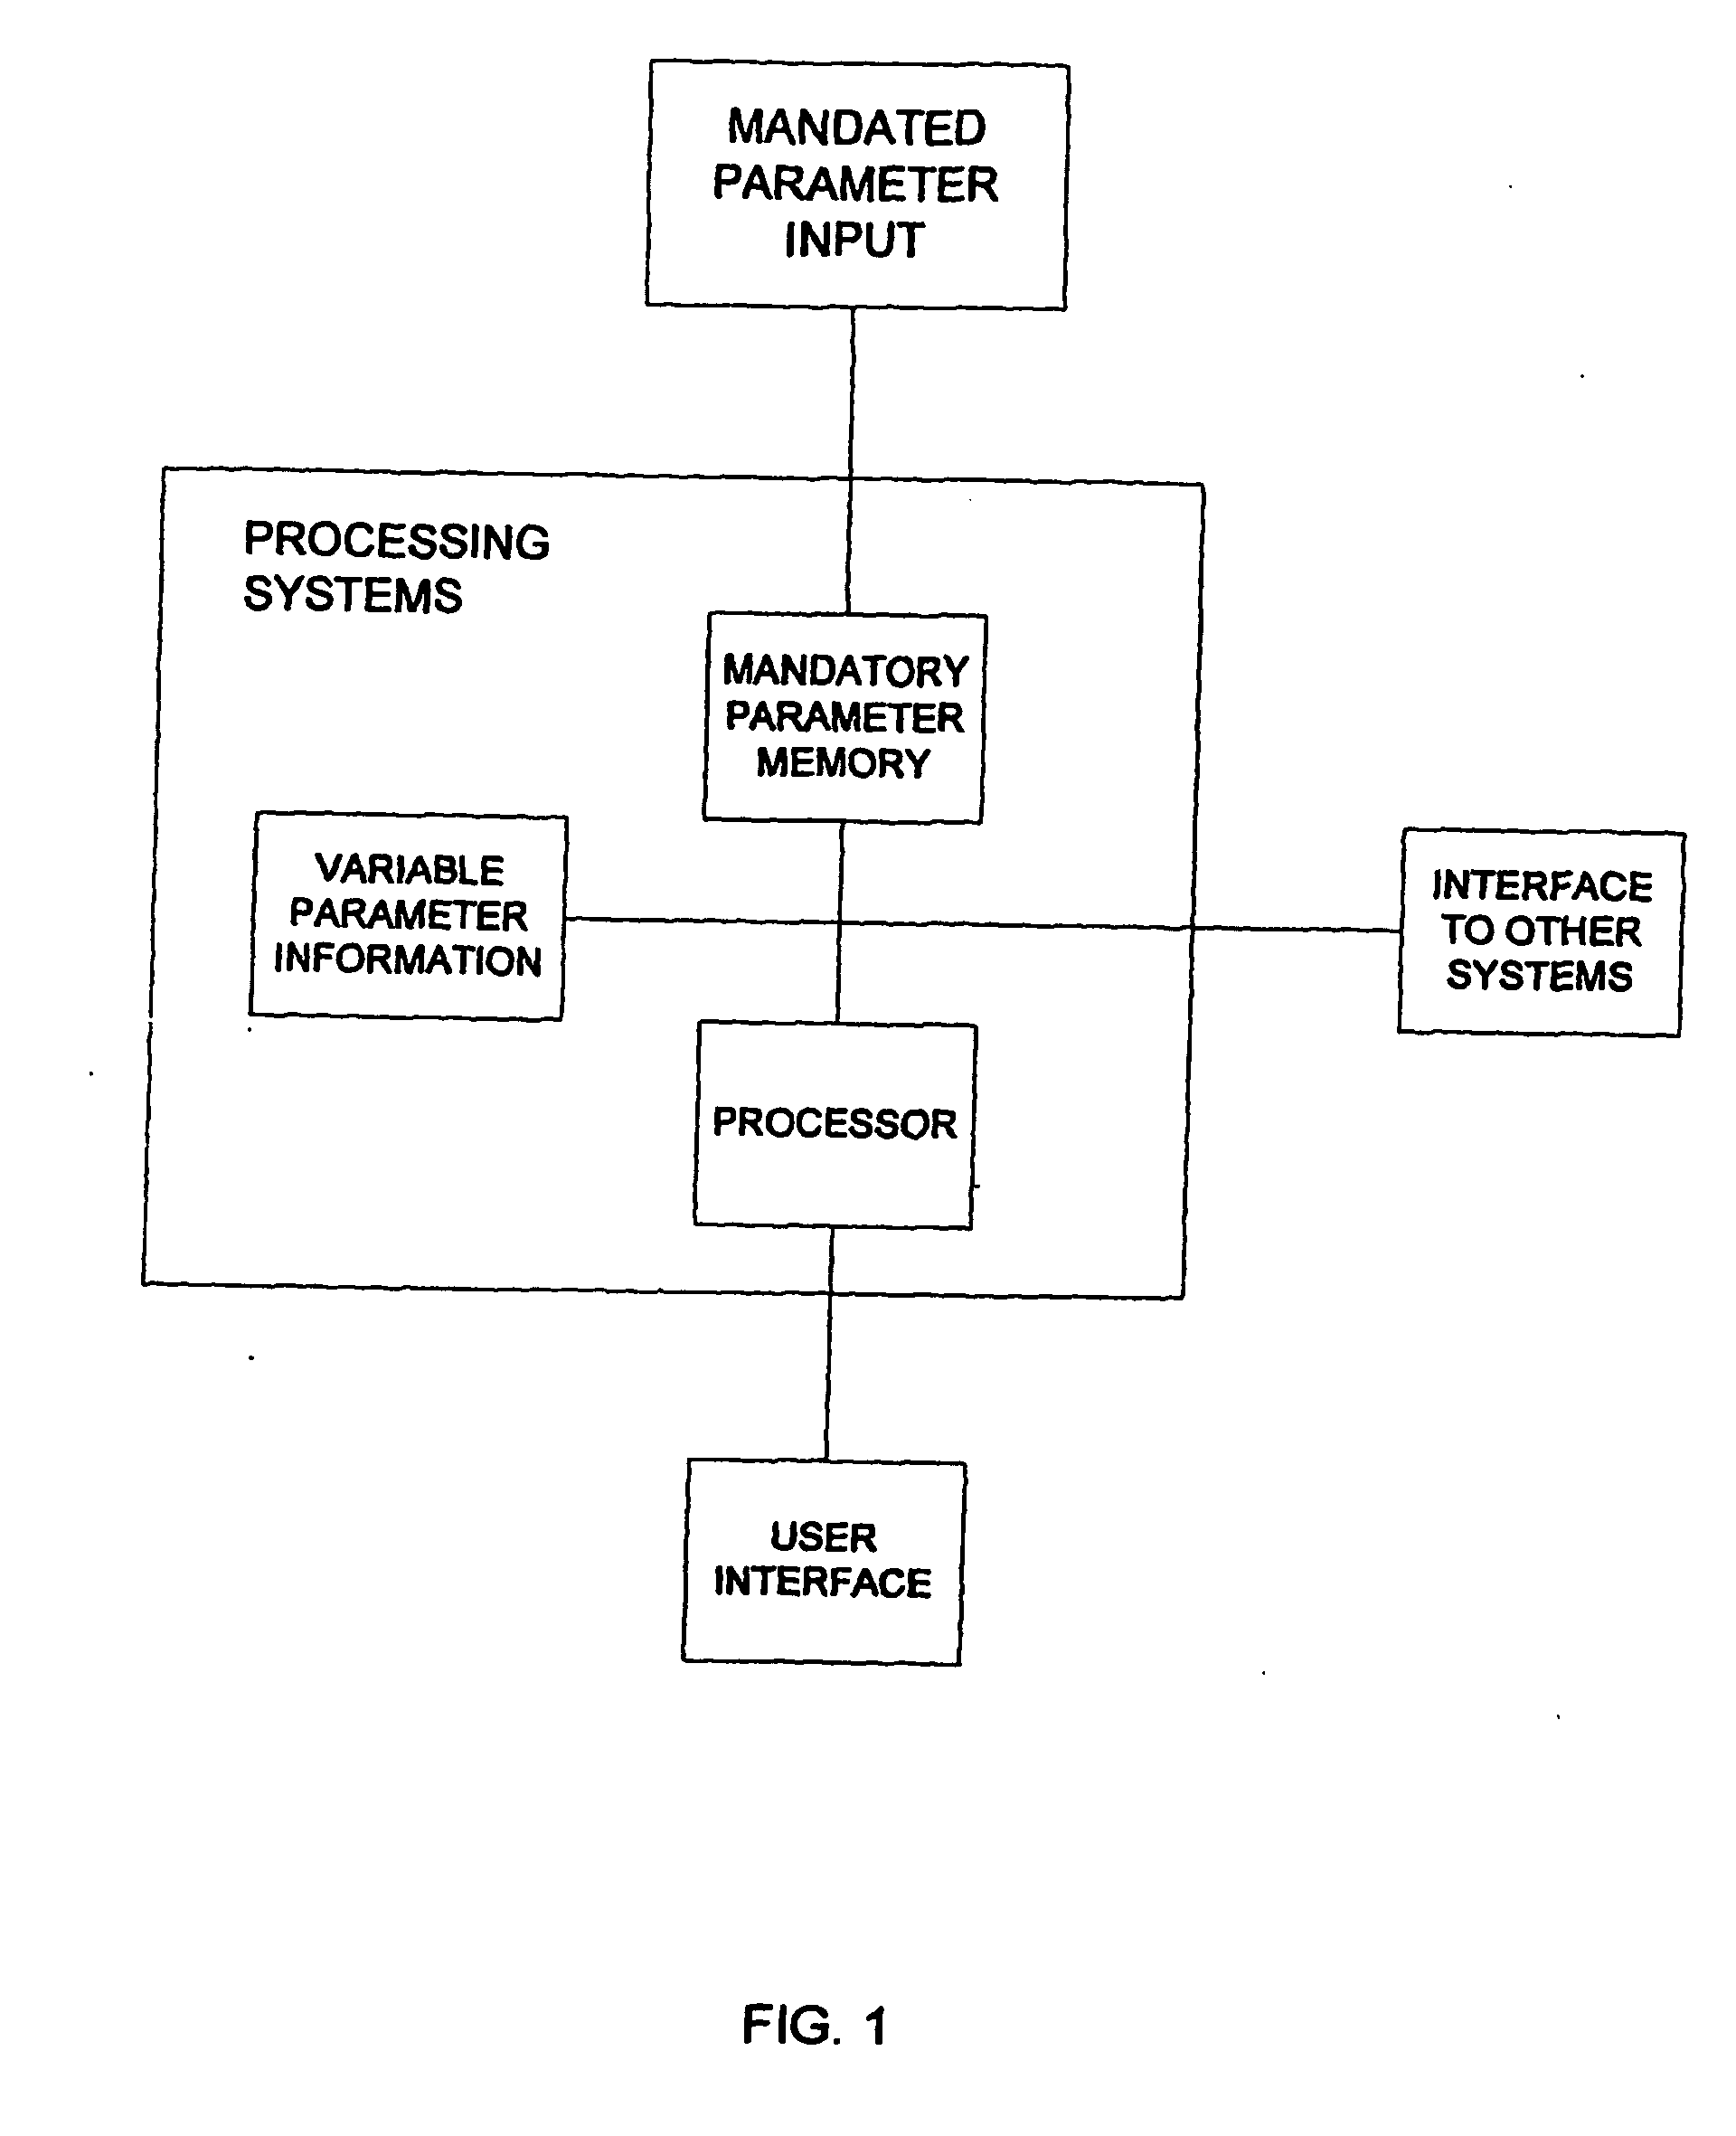 Apparatus, systems and methods for implementing enhanced gaming and prizing parameters in an elecronic environment